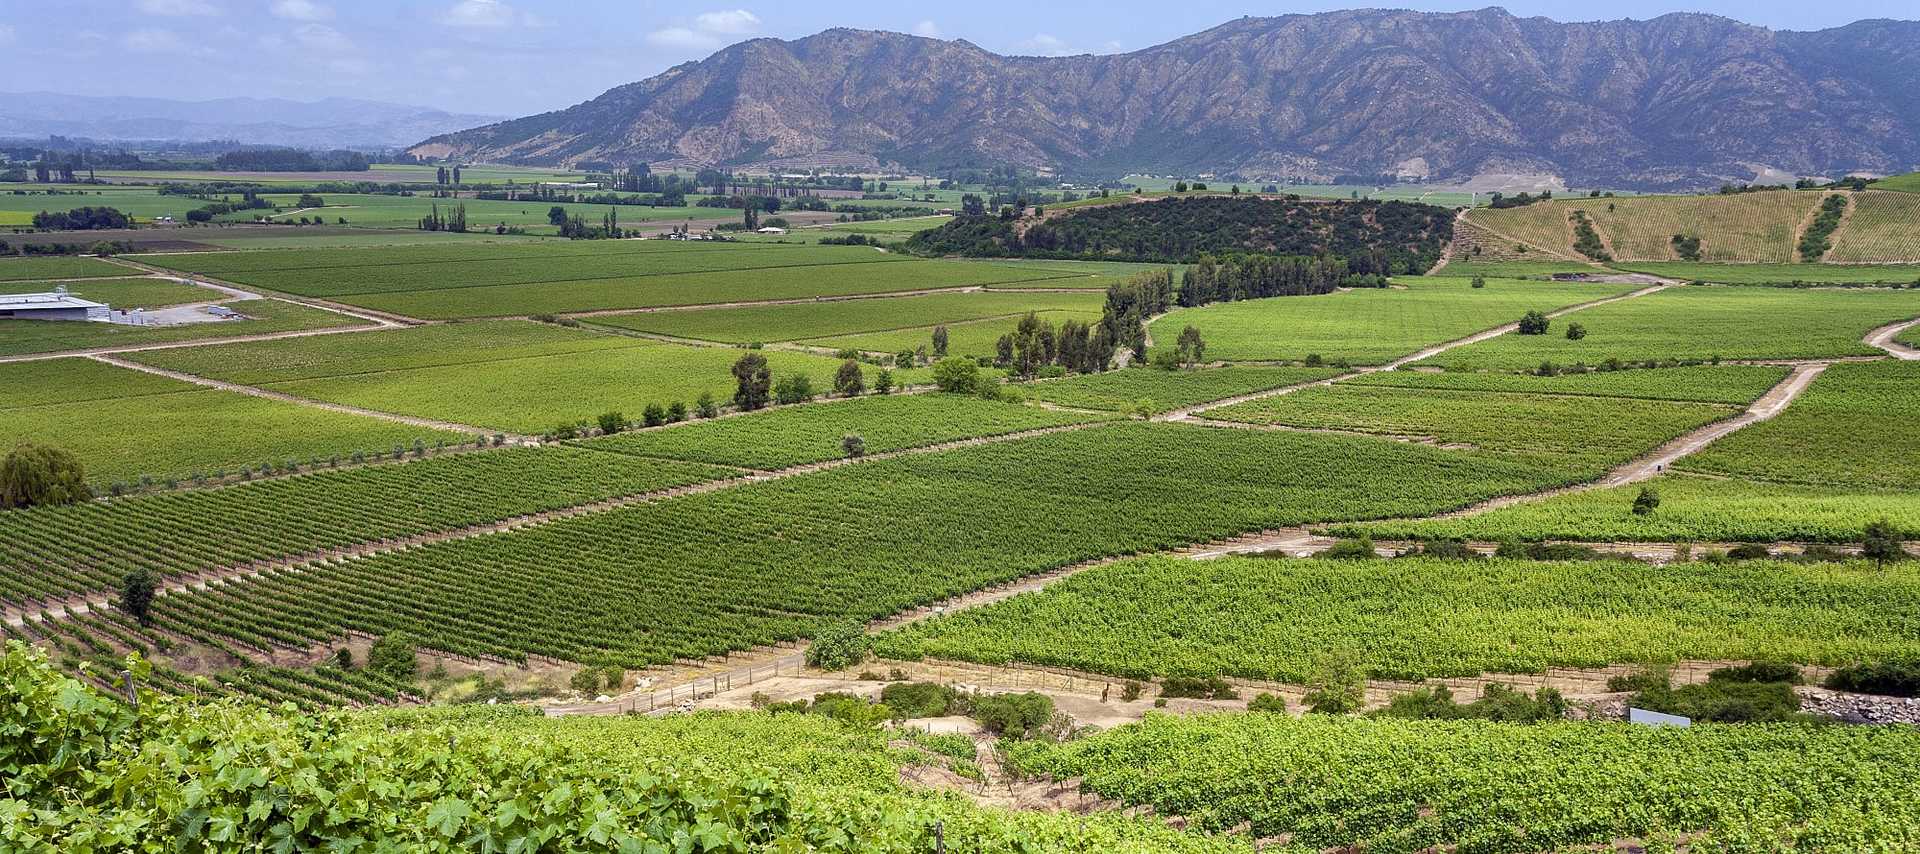 Vineyards in Colchagua Valley, Chile